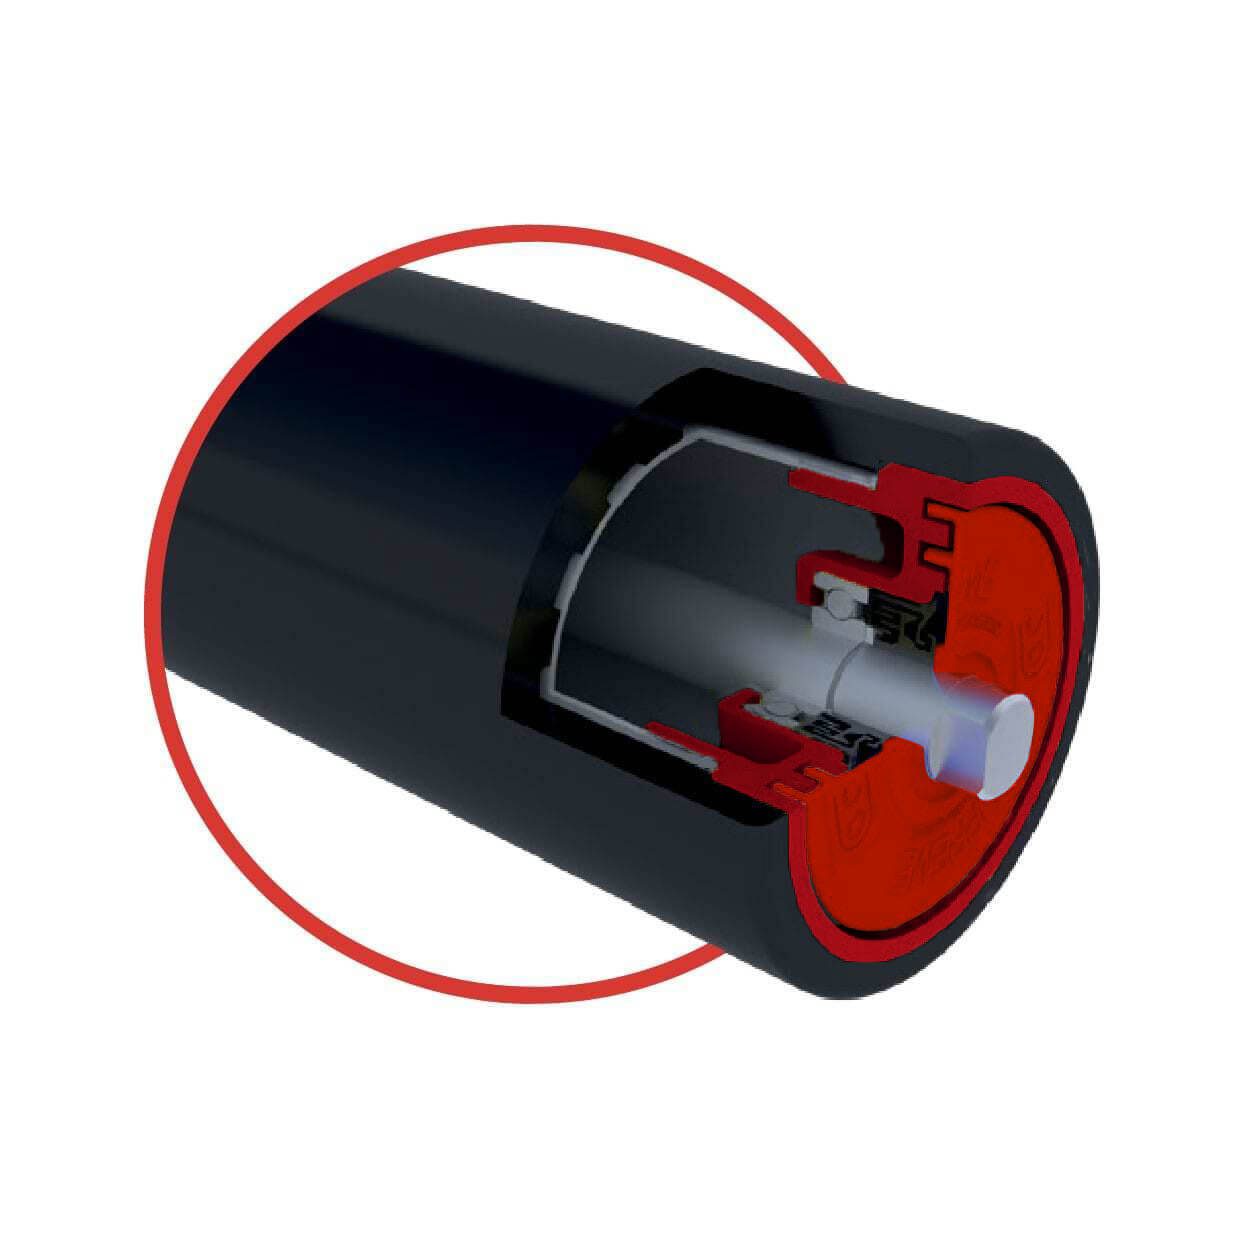 Cross-sectional view of a cylindrical object with an outer black casing and a red interior component, showcasing internal mechanisms and a white central part, characteristic of the Supreme HDPE Series Rollers.